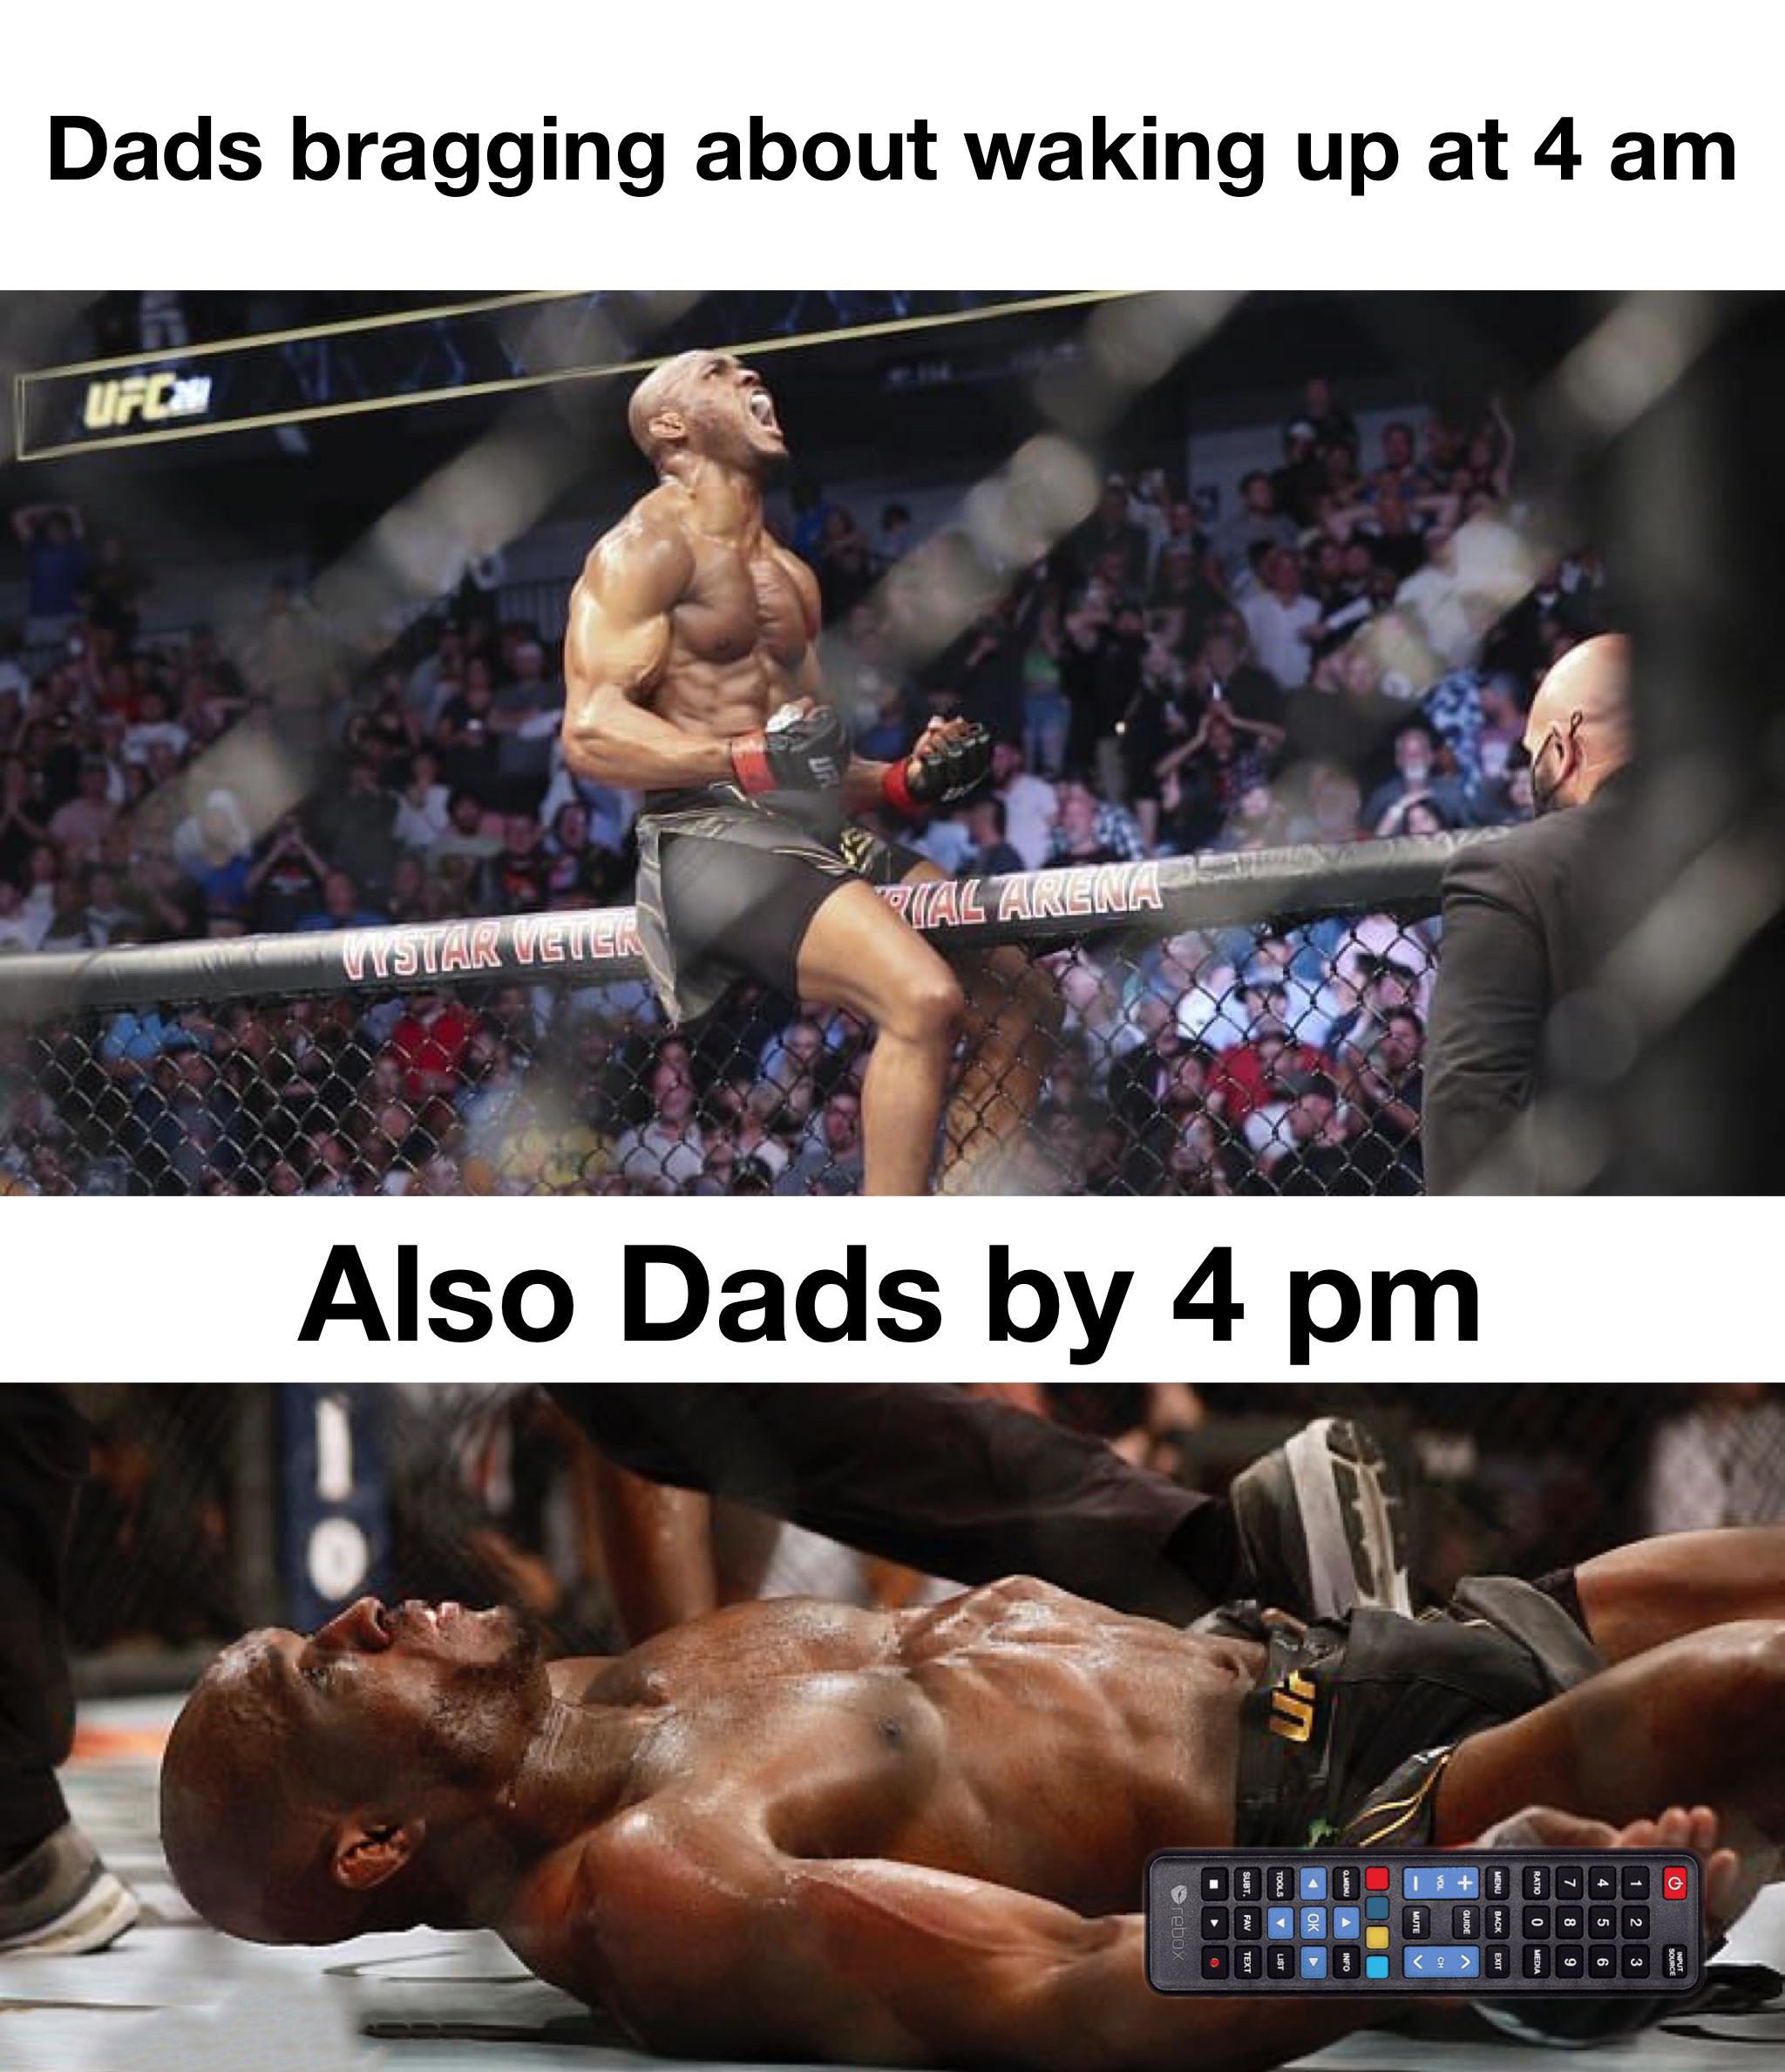 dank memes - kamaru usman on fence - Dads bragging about waking up at 4 am Ufch Vistar Vetsk Talainena Also Dads by 4 pm 000 600 100000 10000